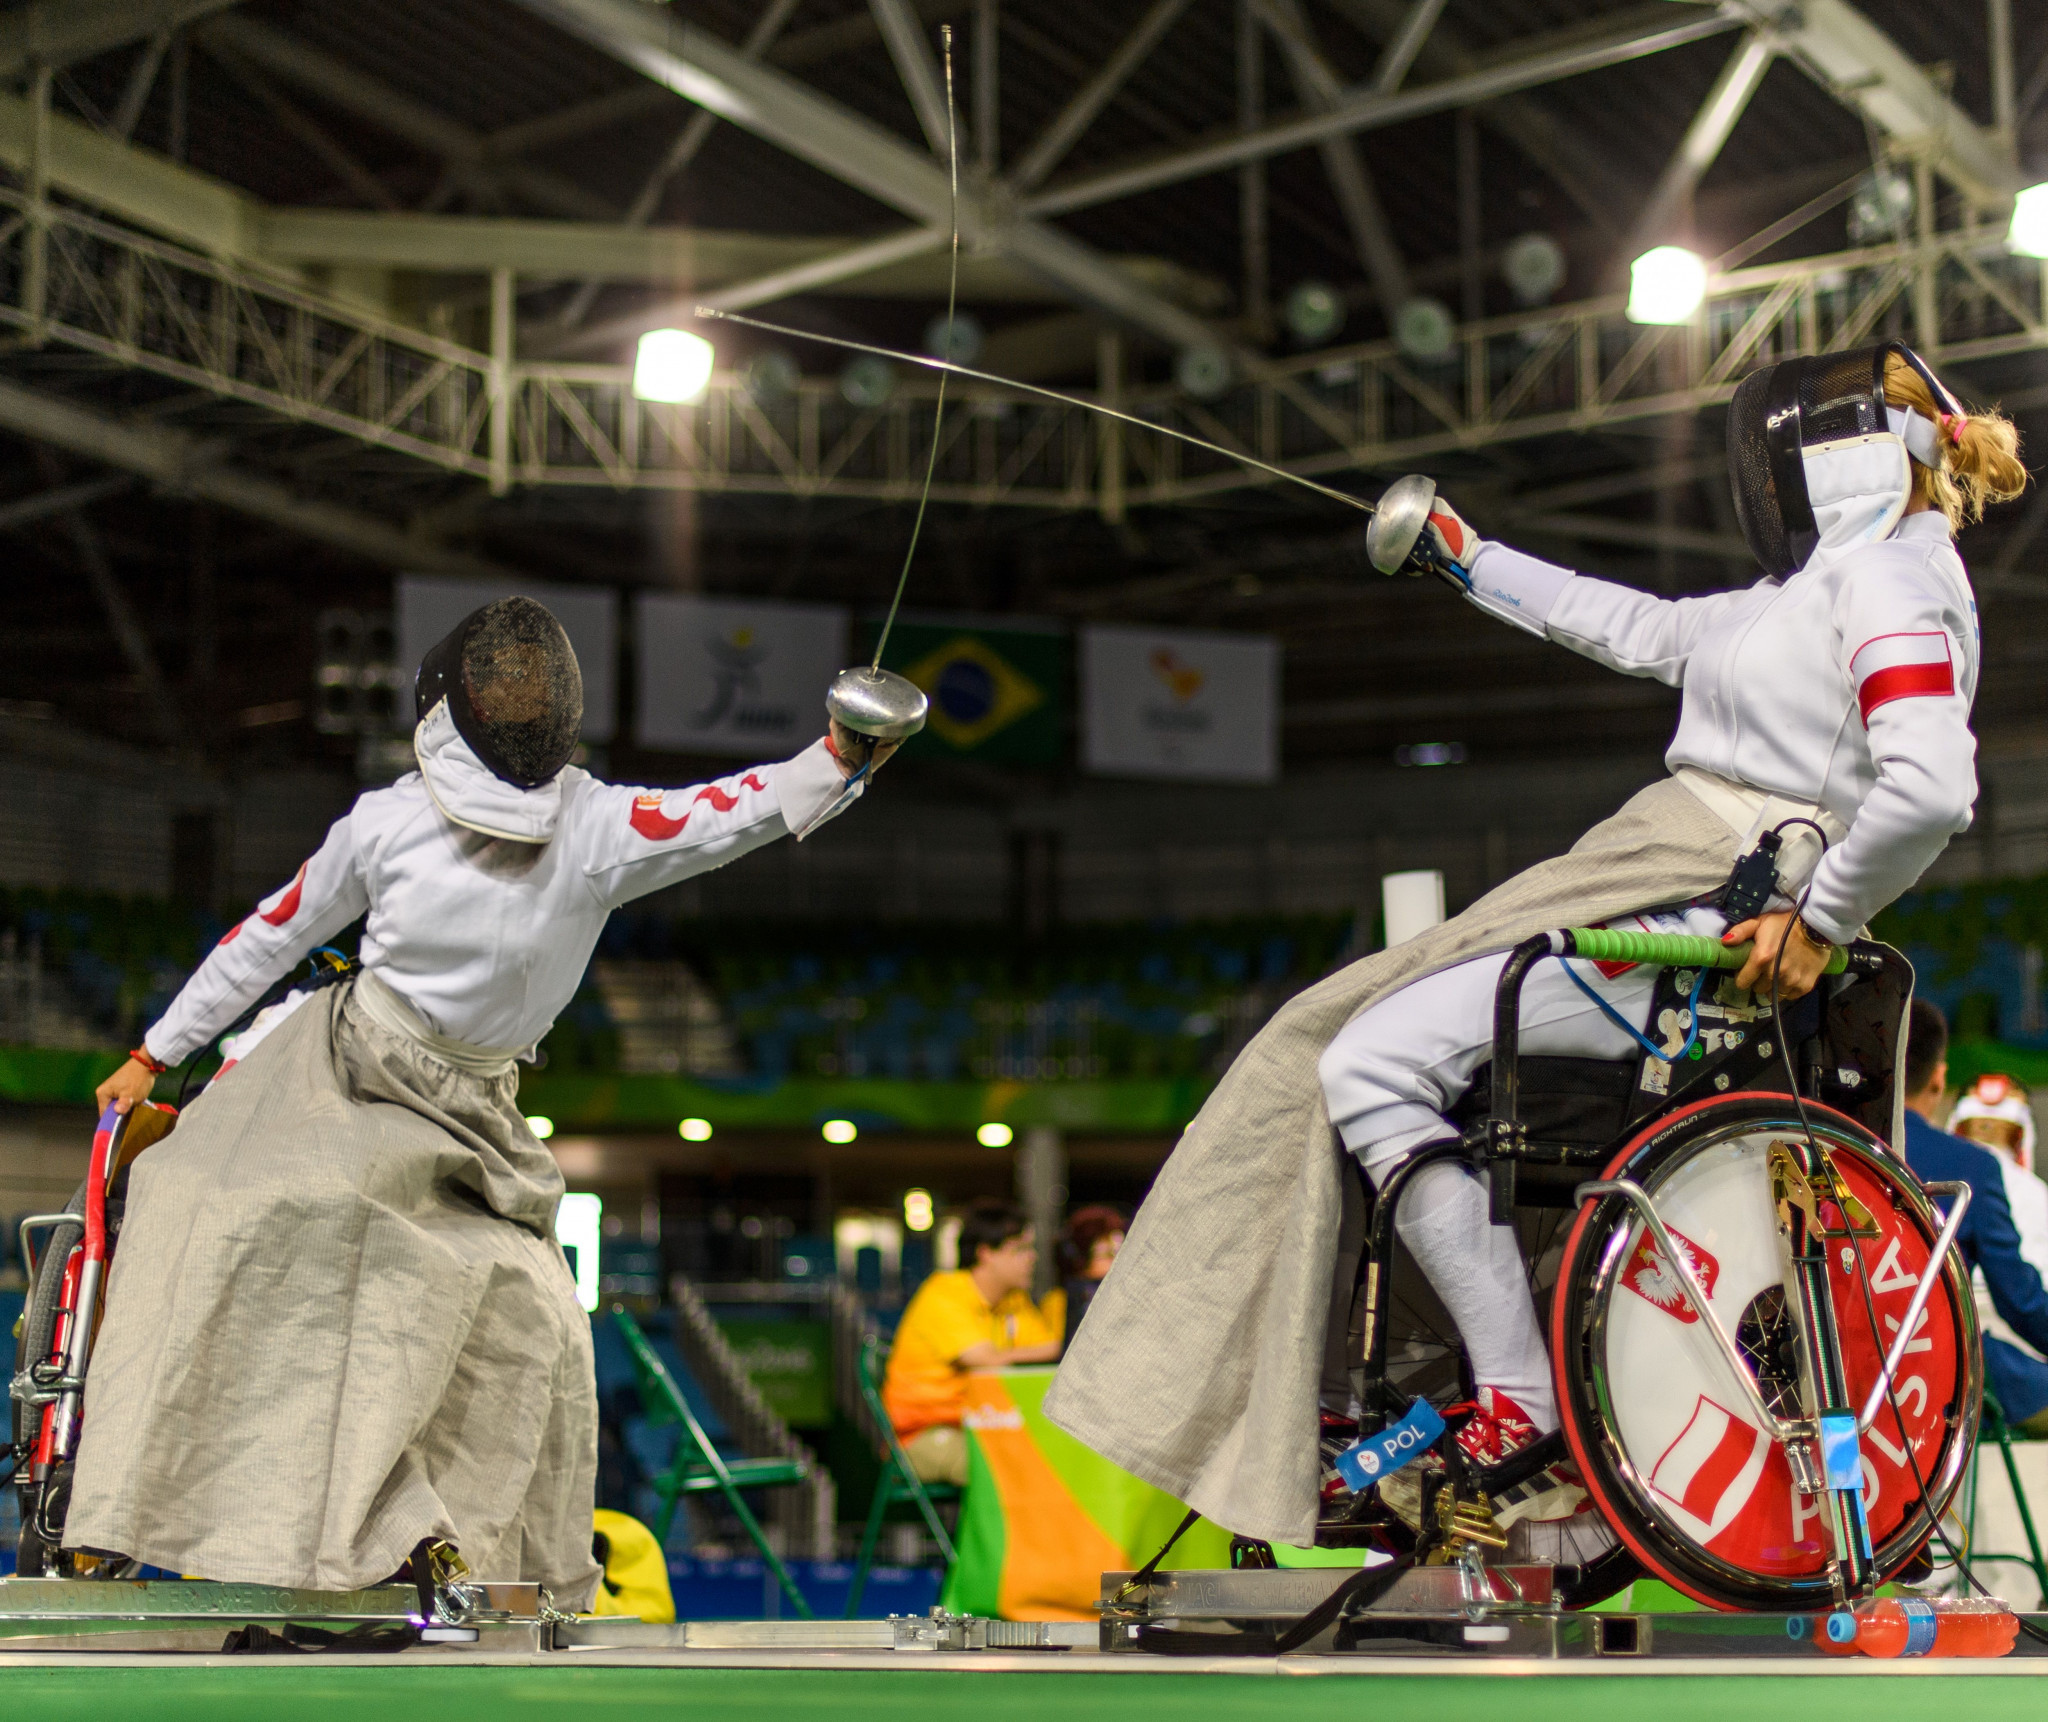 Warsaw has been a regular destination for major wheelchair fencing events ©Getty Images